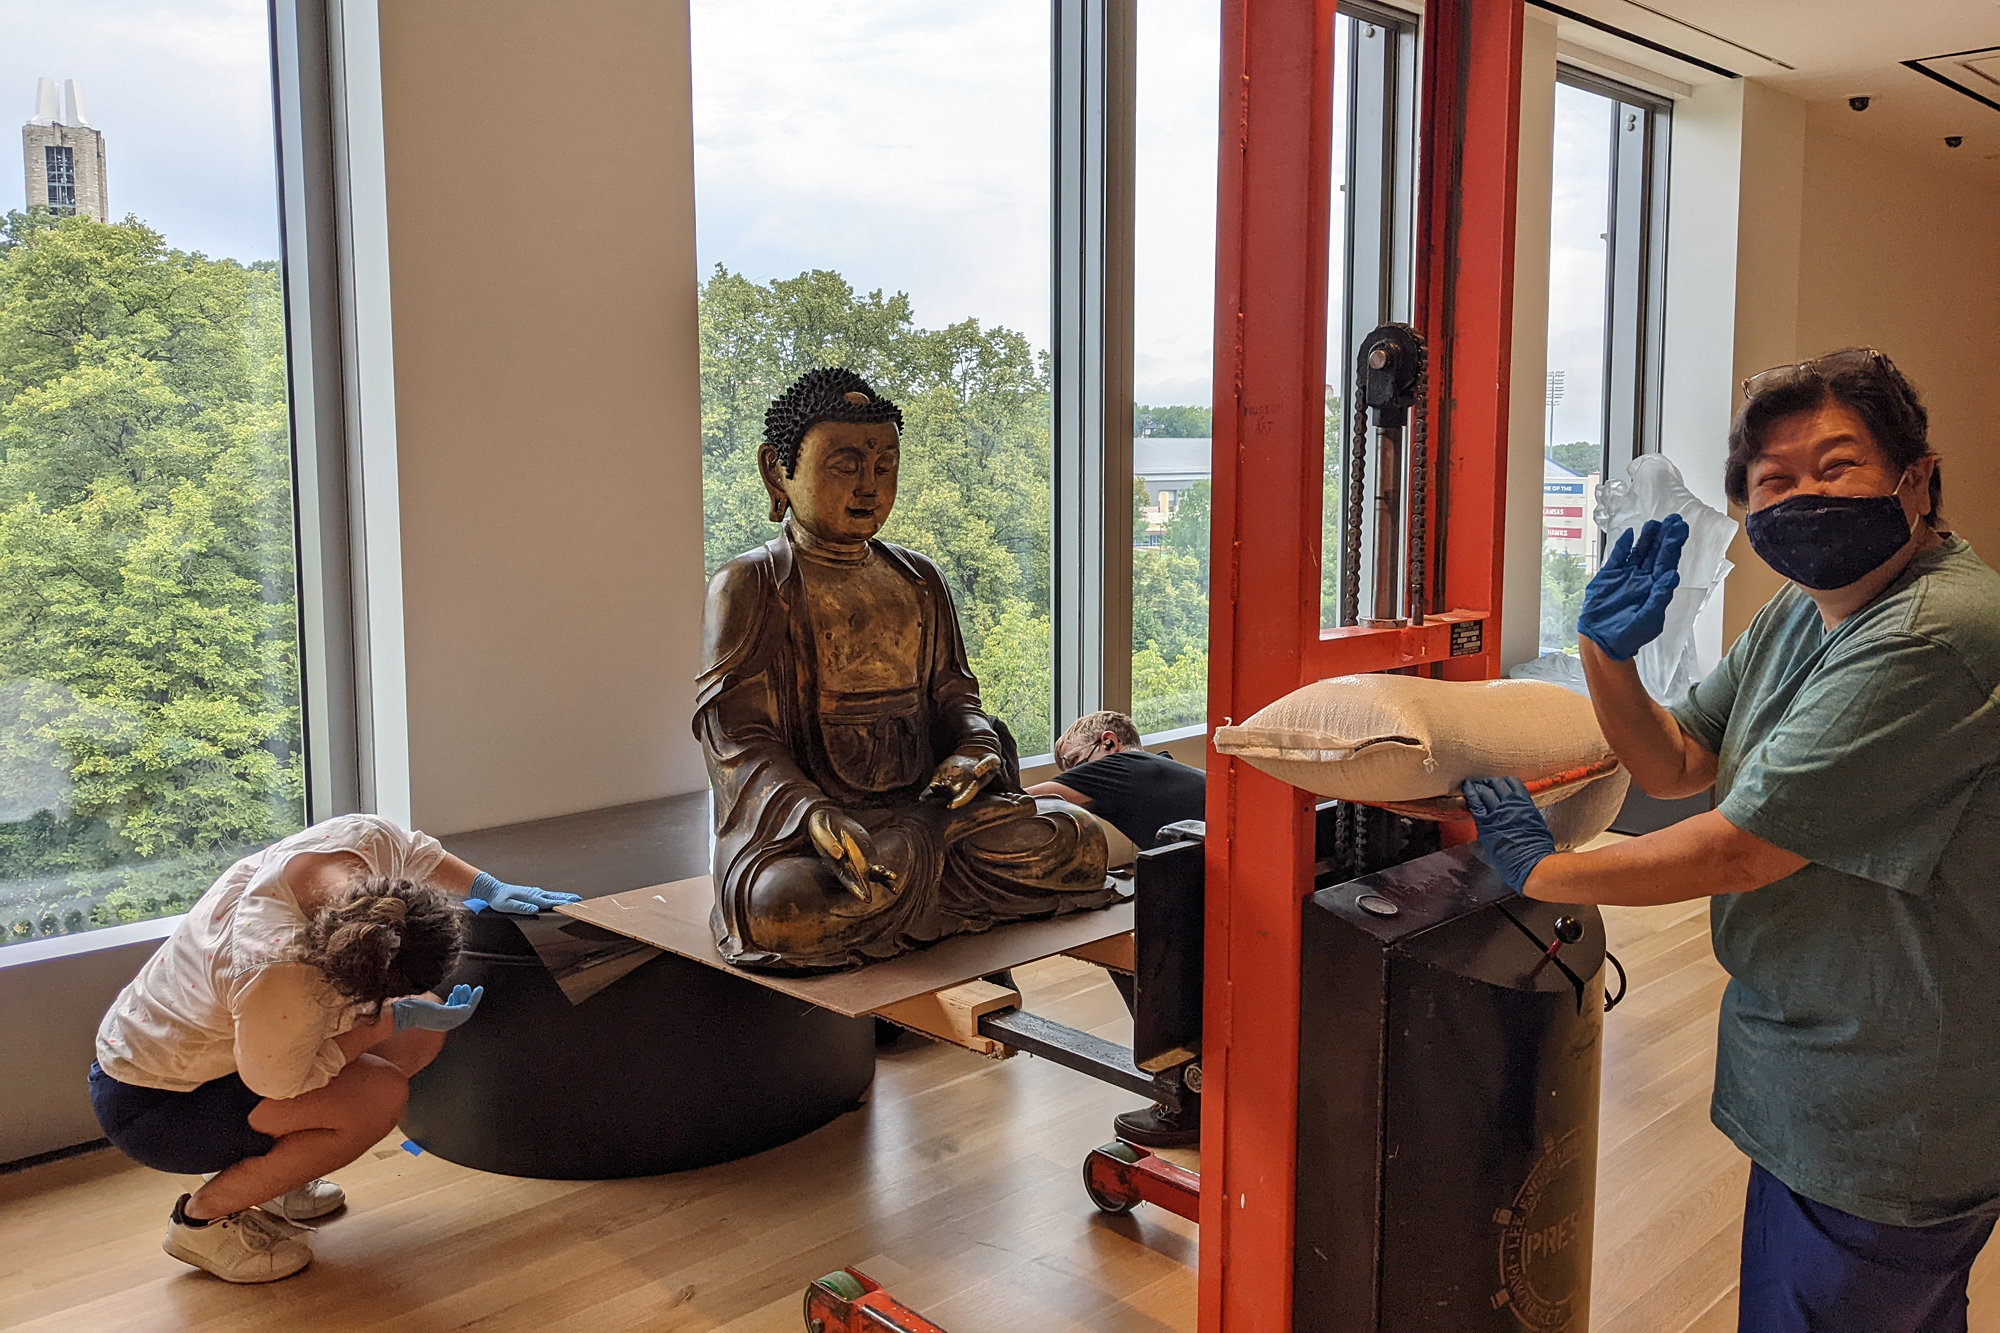 Three people working in front of a window move a Buddha sculpture using machinery